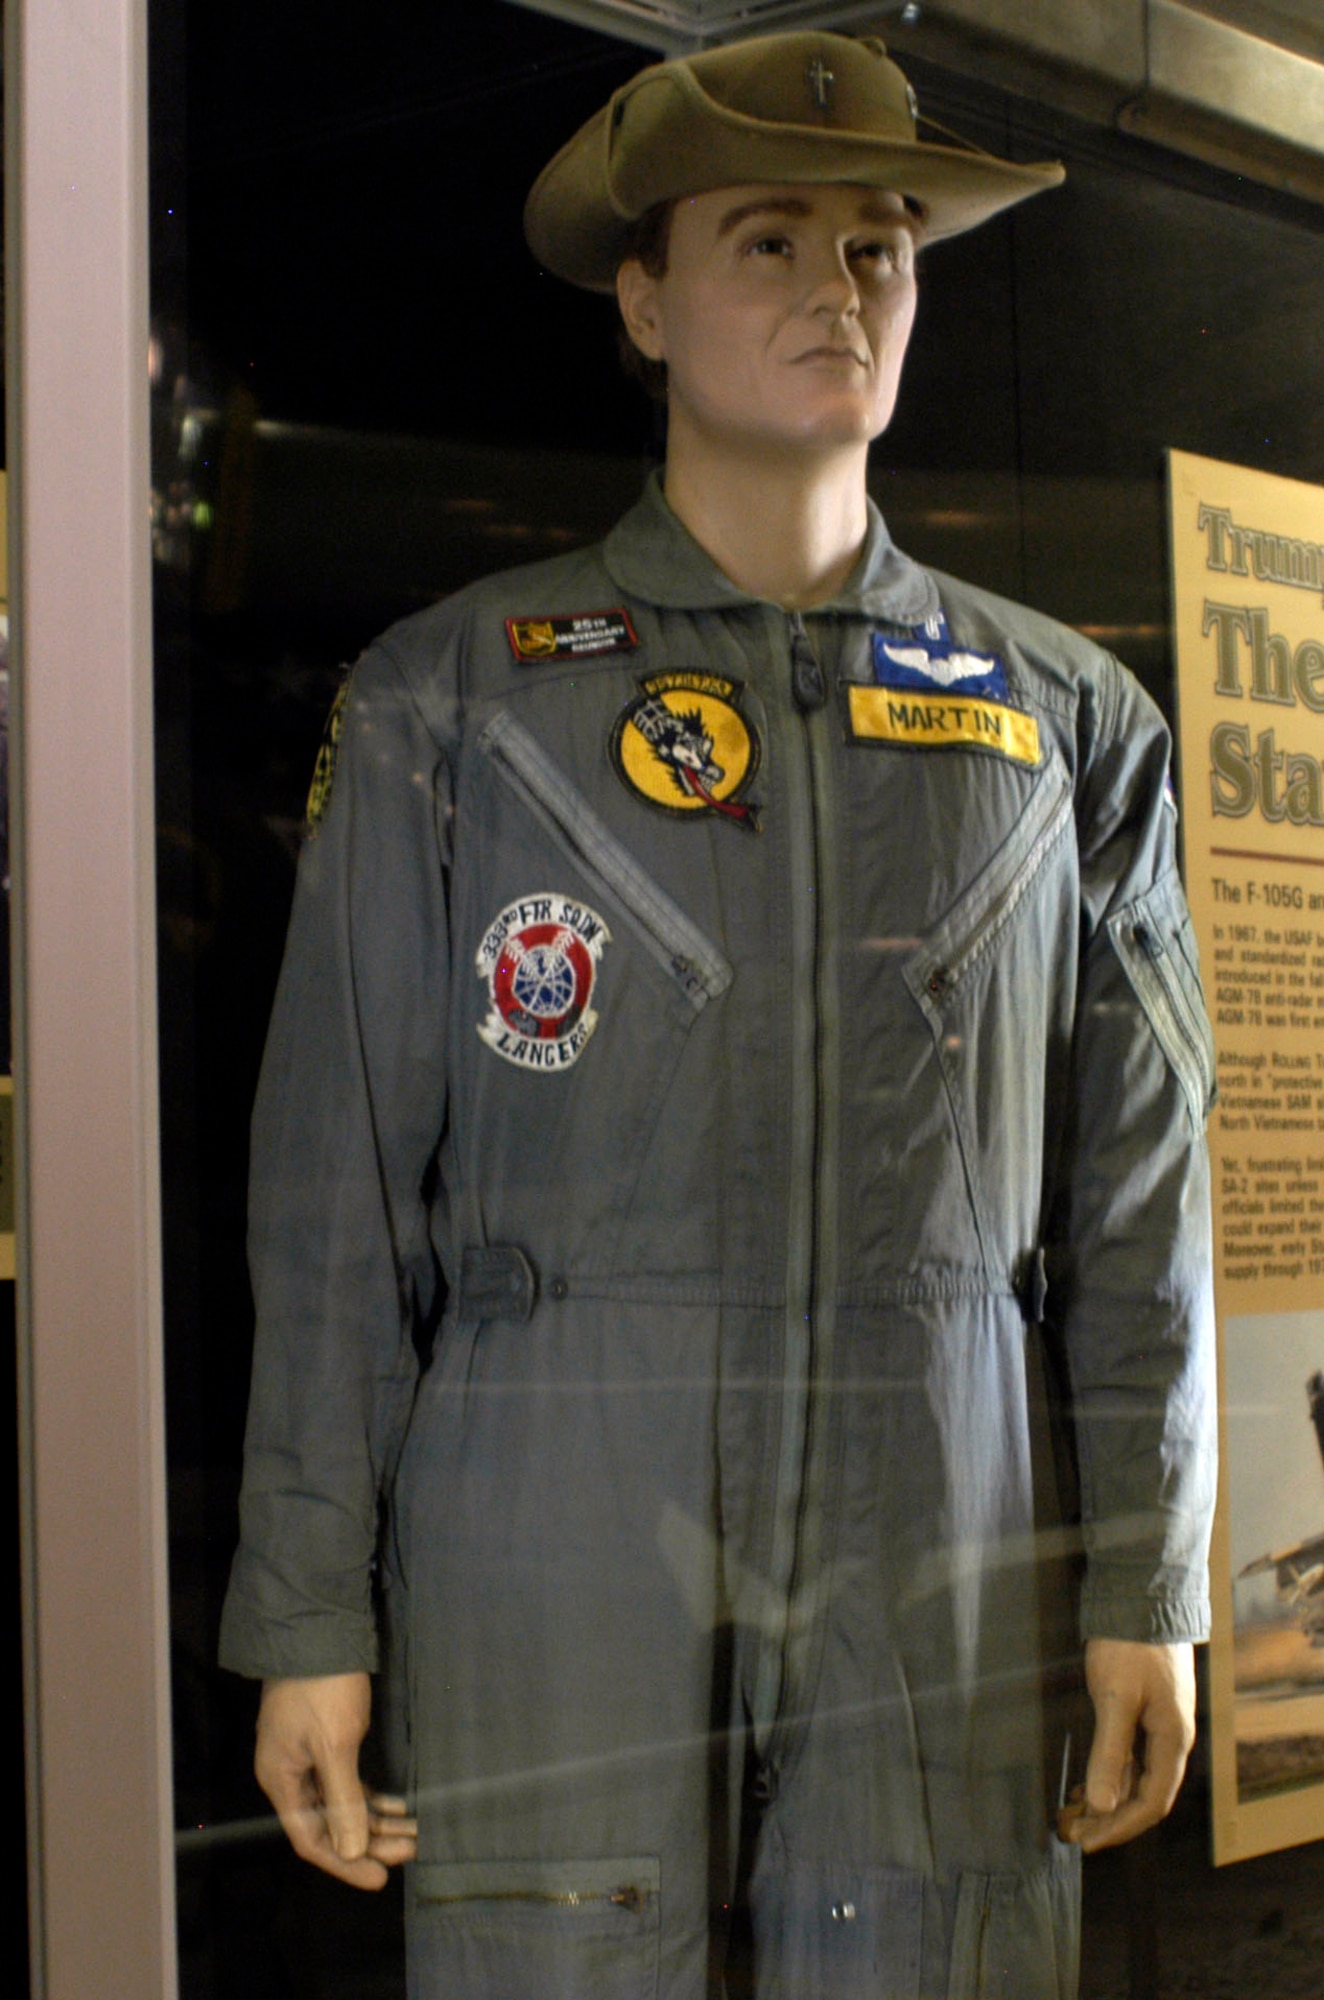 DAYTON, Ohio - Chaplain Chris Martin's K-2B suit worn during his tour at Takhli. It carries the insignia of the 355th TFW's three squadrons, the 333rd Tactical Fighter Squadron (TFS), 354th TFS and 357th TFS. At Takhli, the Wild Weaselds did not fly as a separate squadron. Rather, they were spread out between the three squadrons. (U.S. Air Force photo)